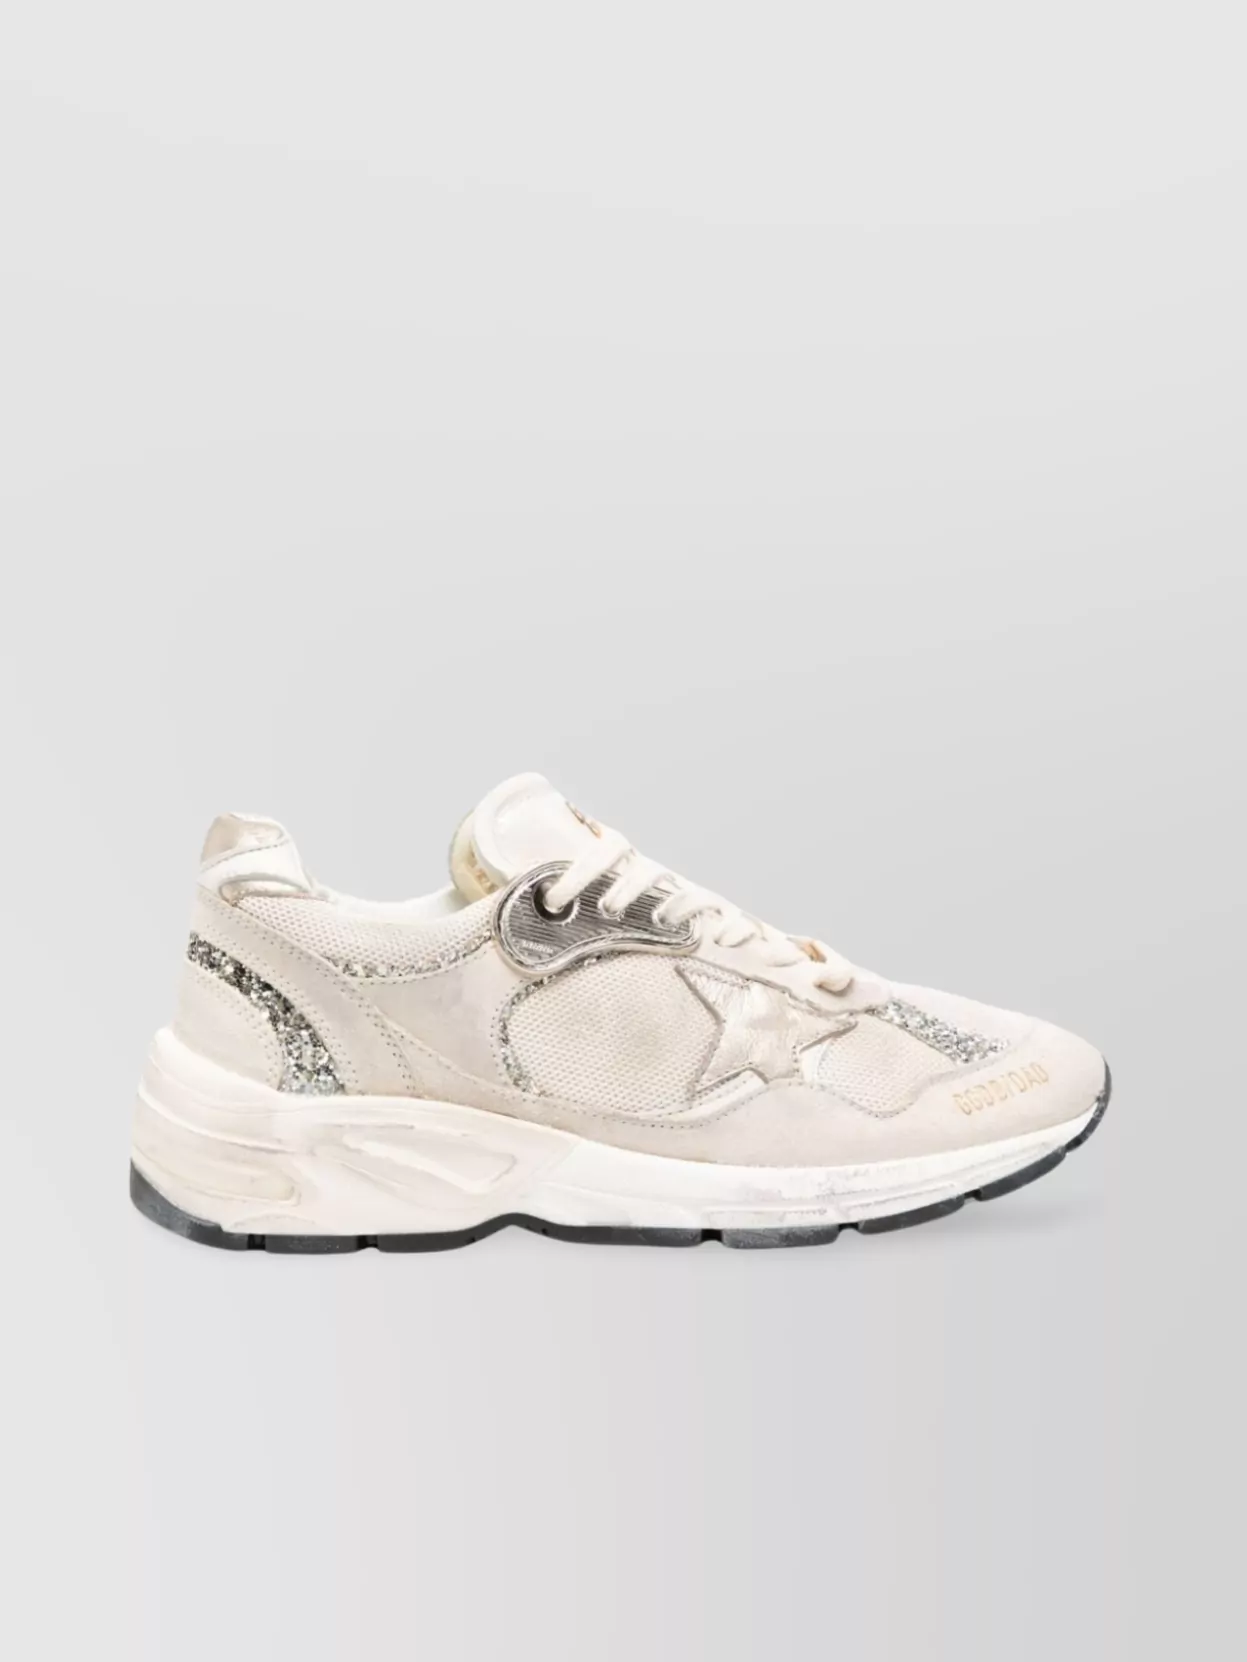 Shop Golden Goose Rubber Sole Sneakers With Distressed Effect And Metallic Finish In Cream